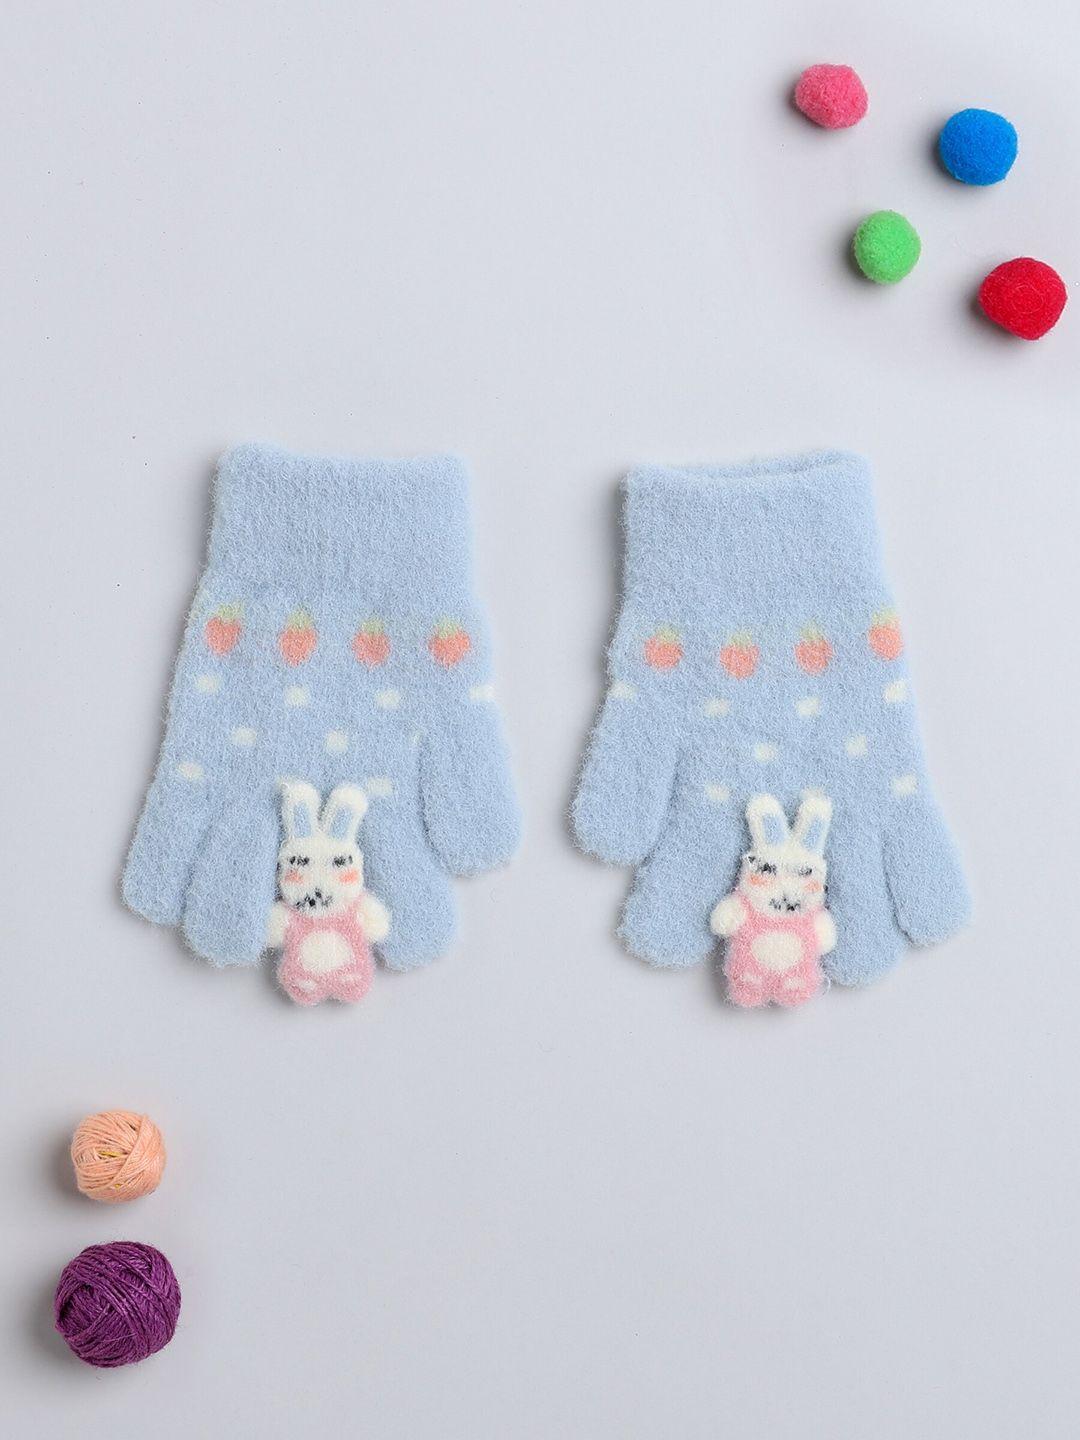 the magic wand boys patterned wool hand gloves